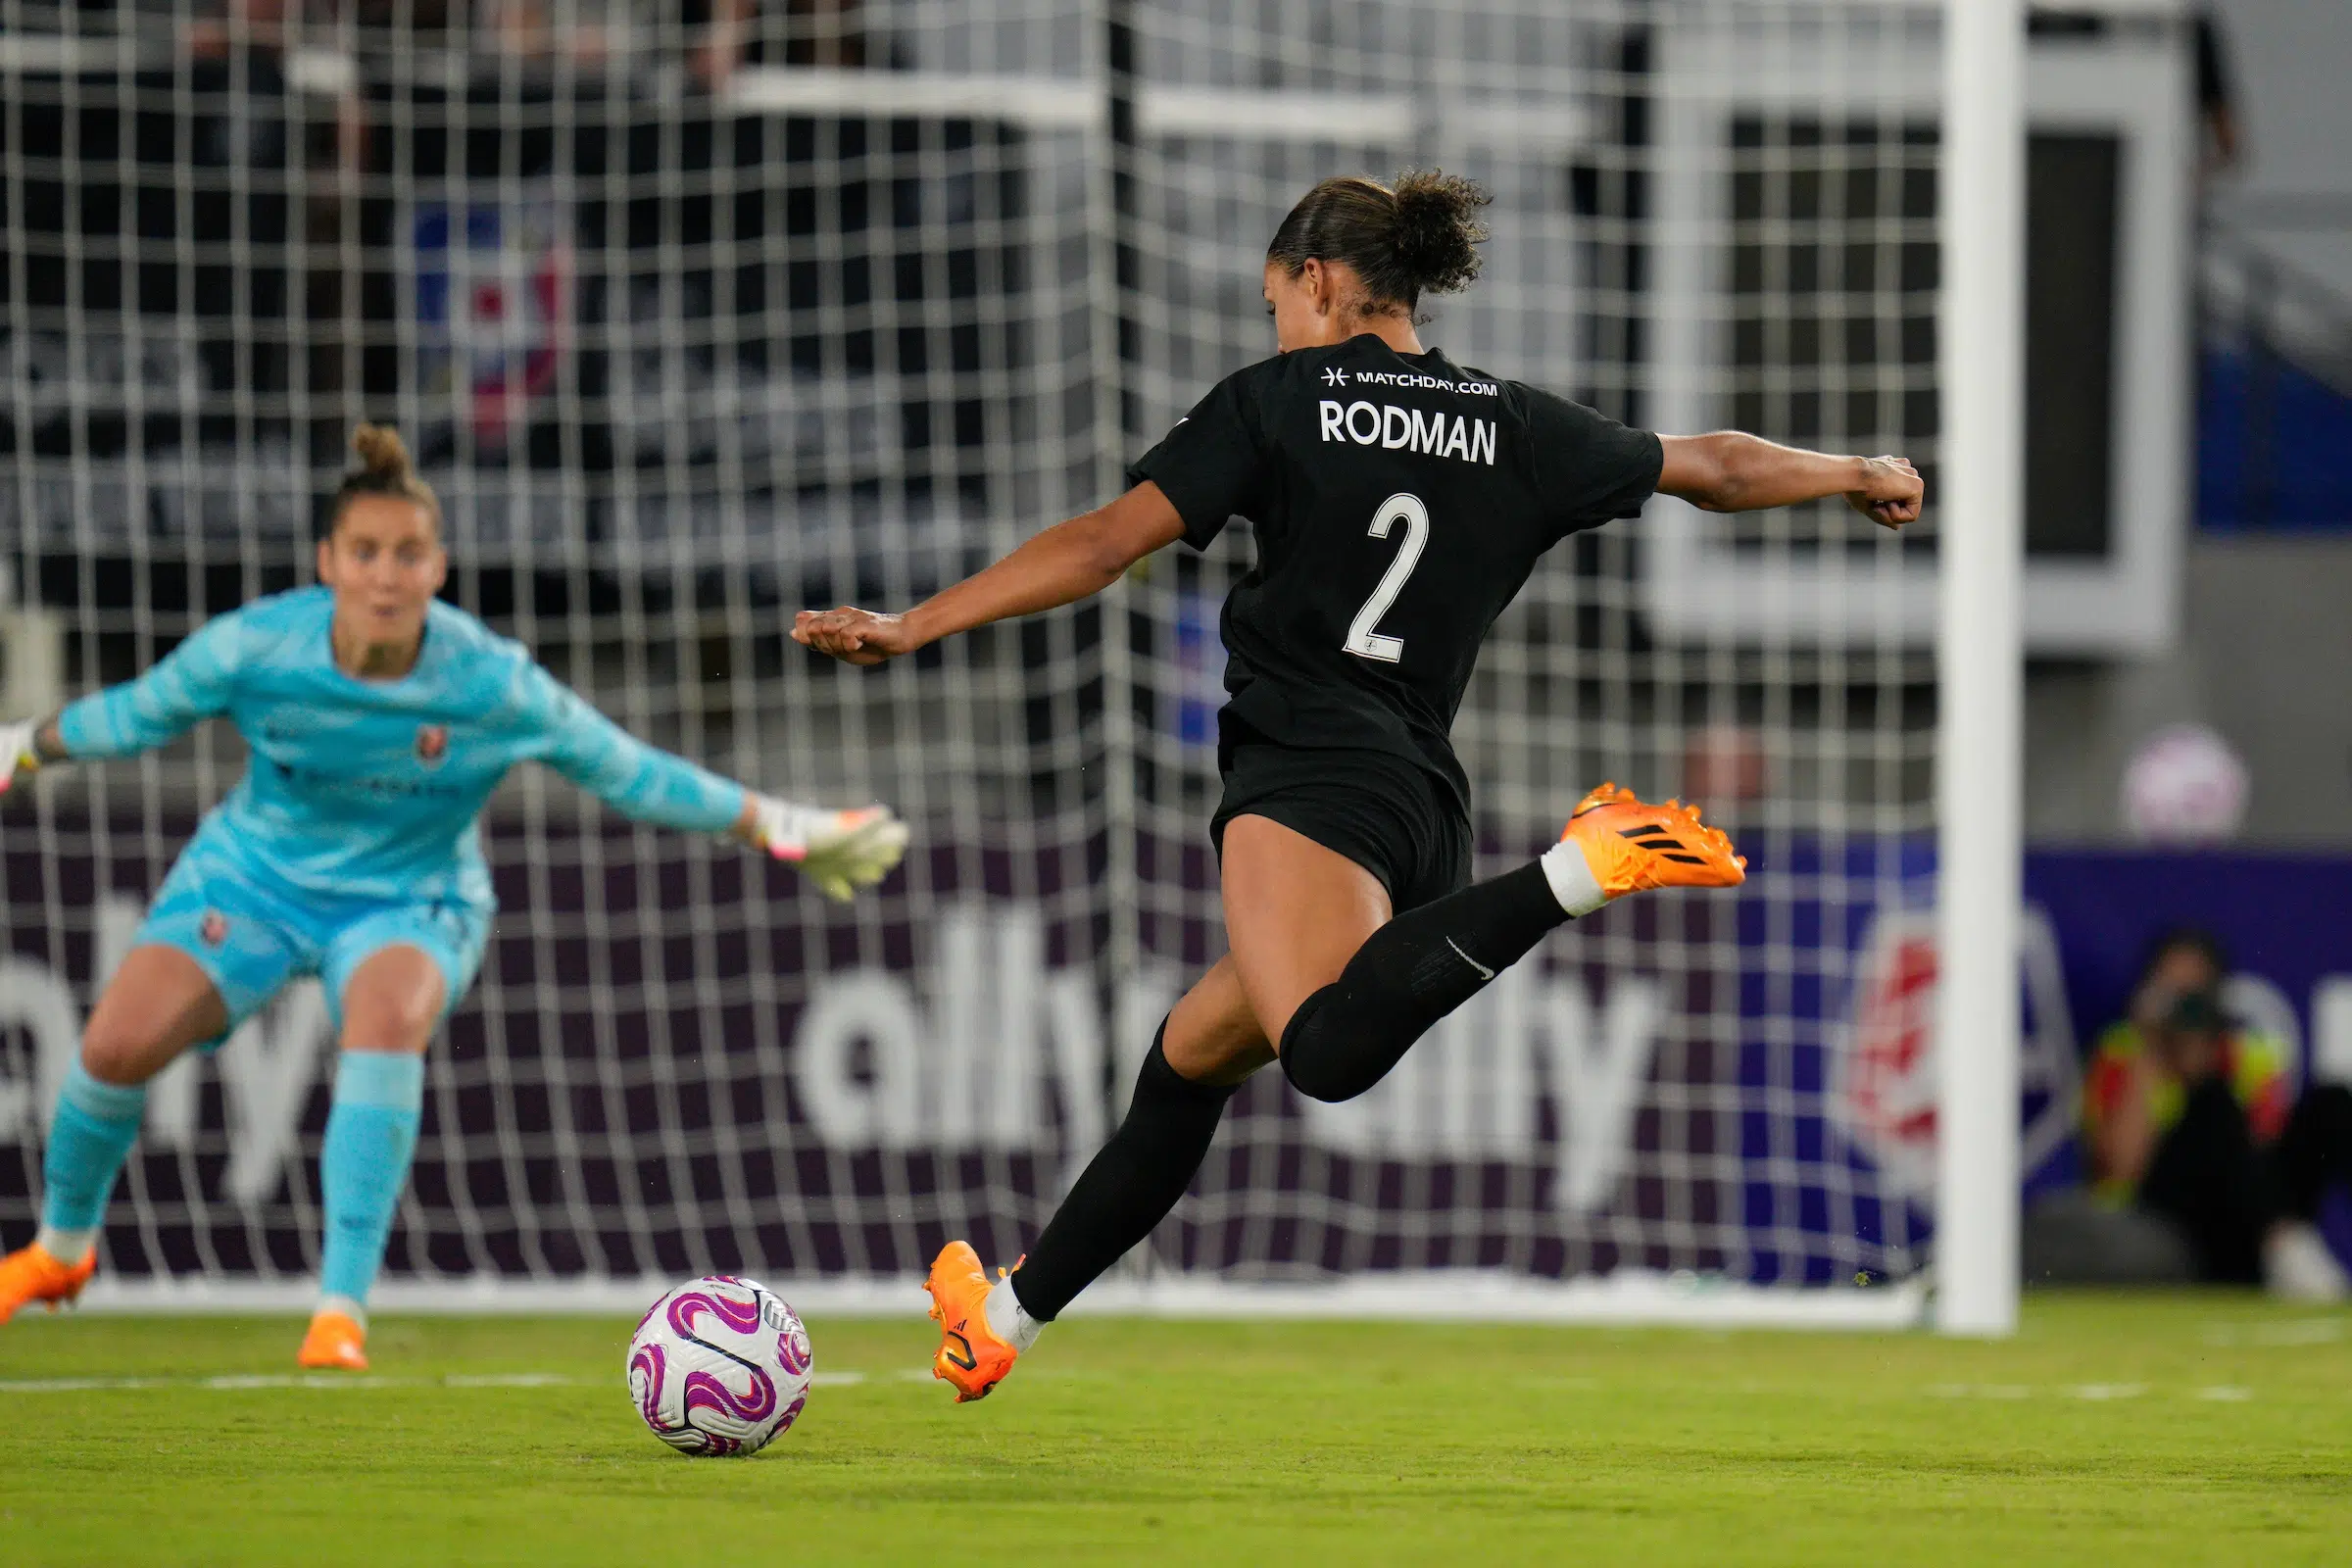 In the foreground, Trinity Rodman in an all black uniform shoots a soccer ball. In the background out of focus, a goalie in a bright blue uniform outstretches her arms and attempts to block the shot.